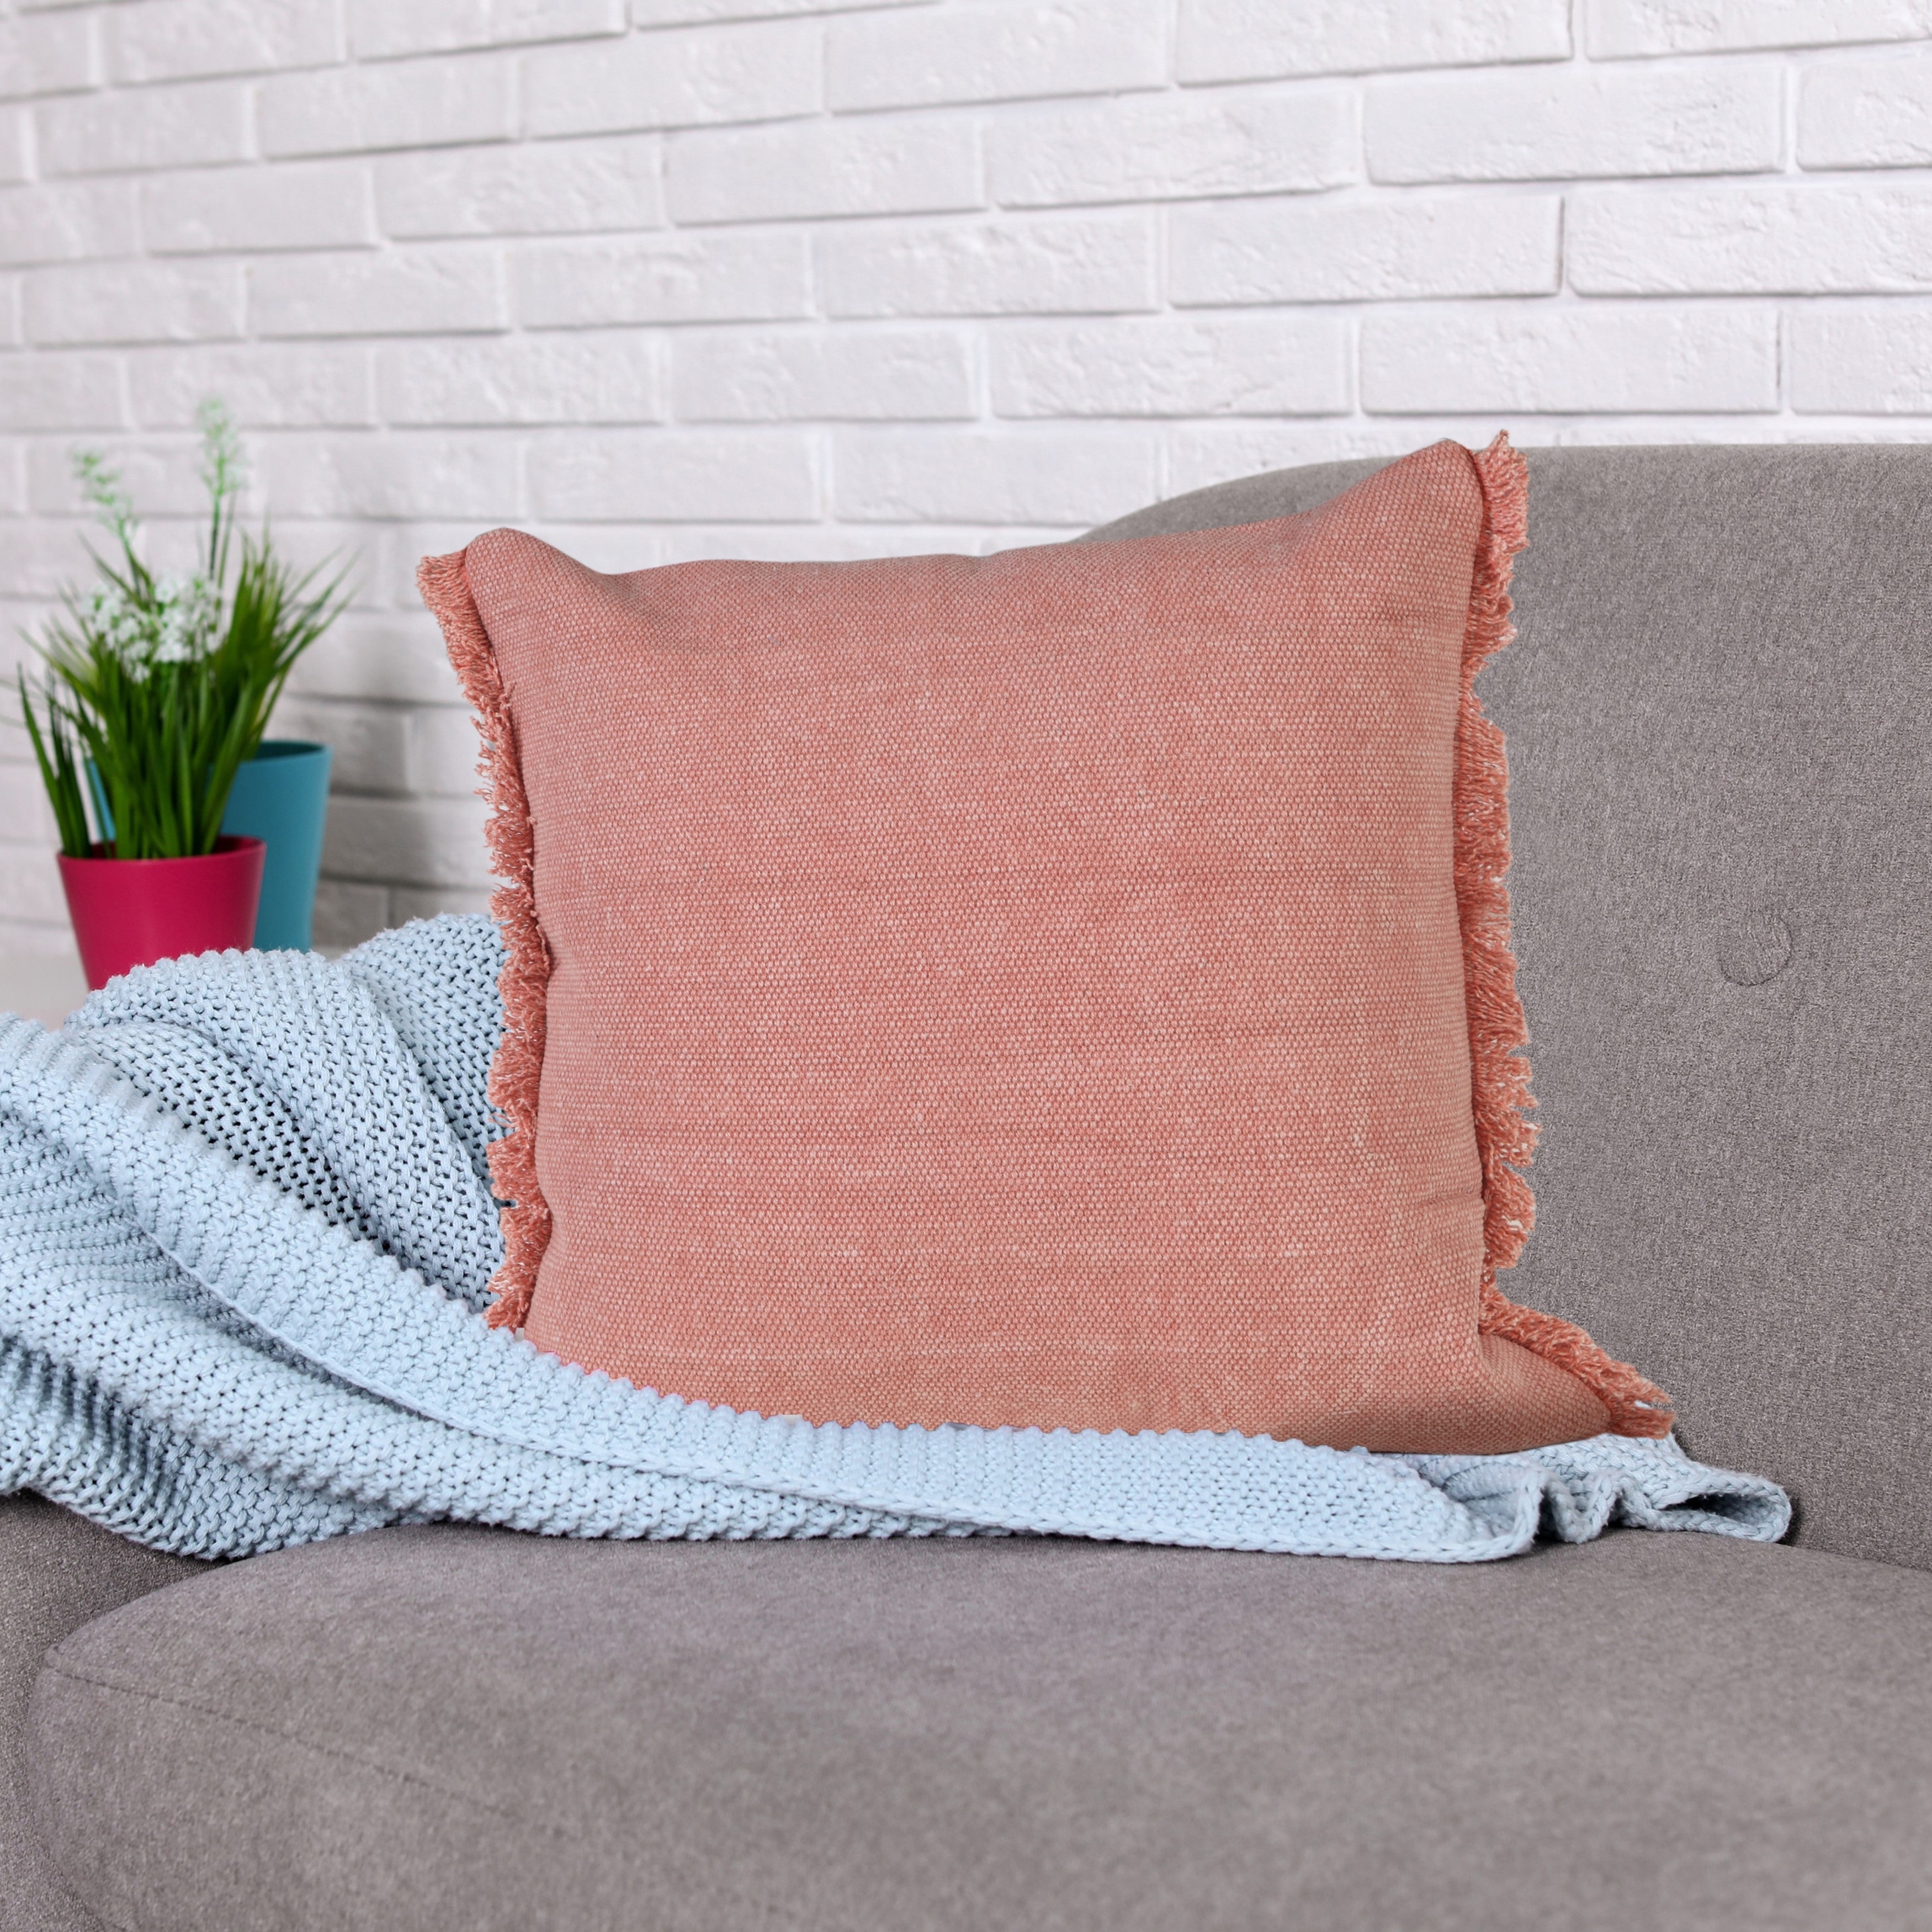 https://ak1.ostkcdn.com/images/products/is/images/direct/adc351a96c3ce0af2f12a725897b999234a3de72/Light-Pink-Solid-Stonewash-Throw-Pillow-with-Fringe.jpg